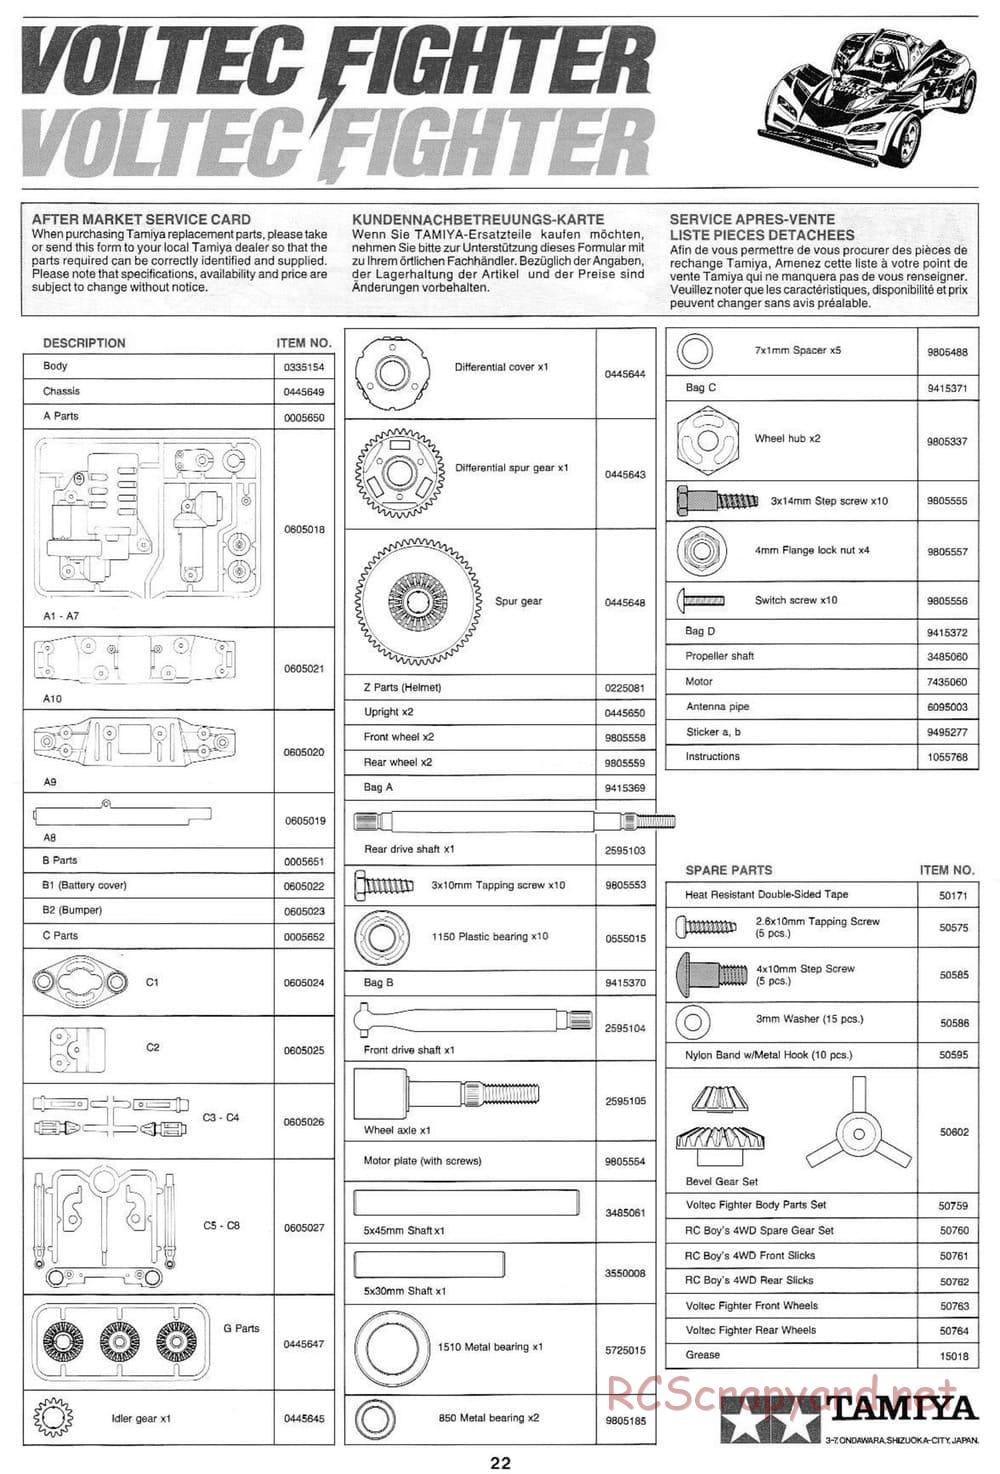 Tamiya - Voltec Fighter - Boy's 4WD Chassis - Manual - Page 22